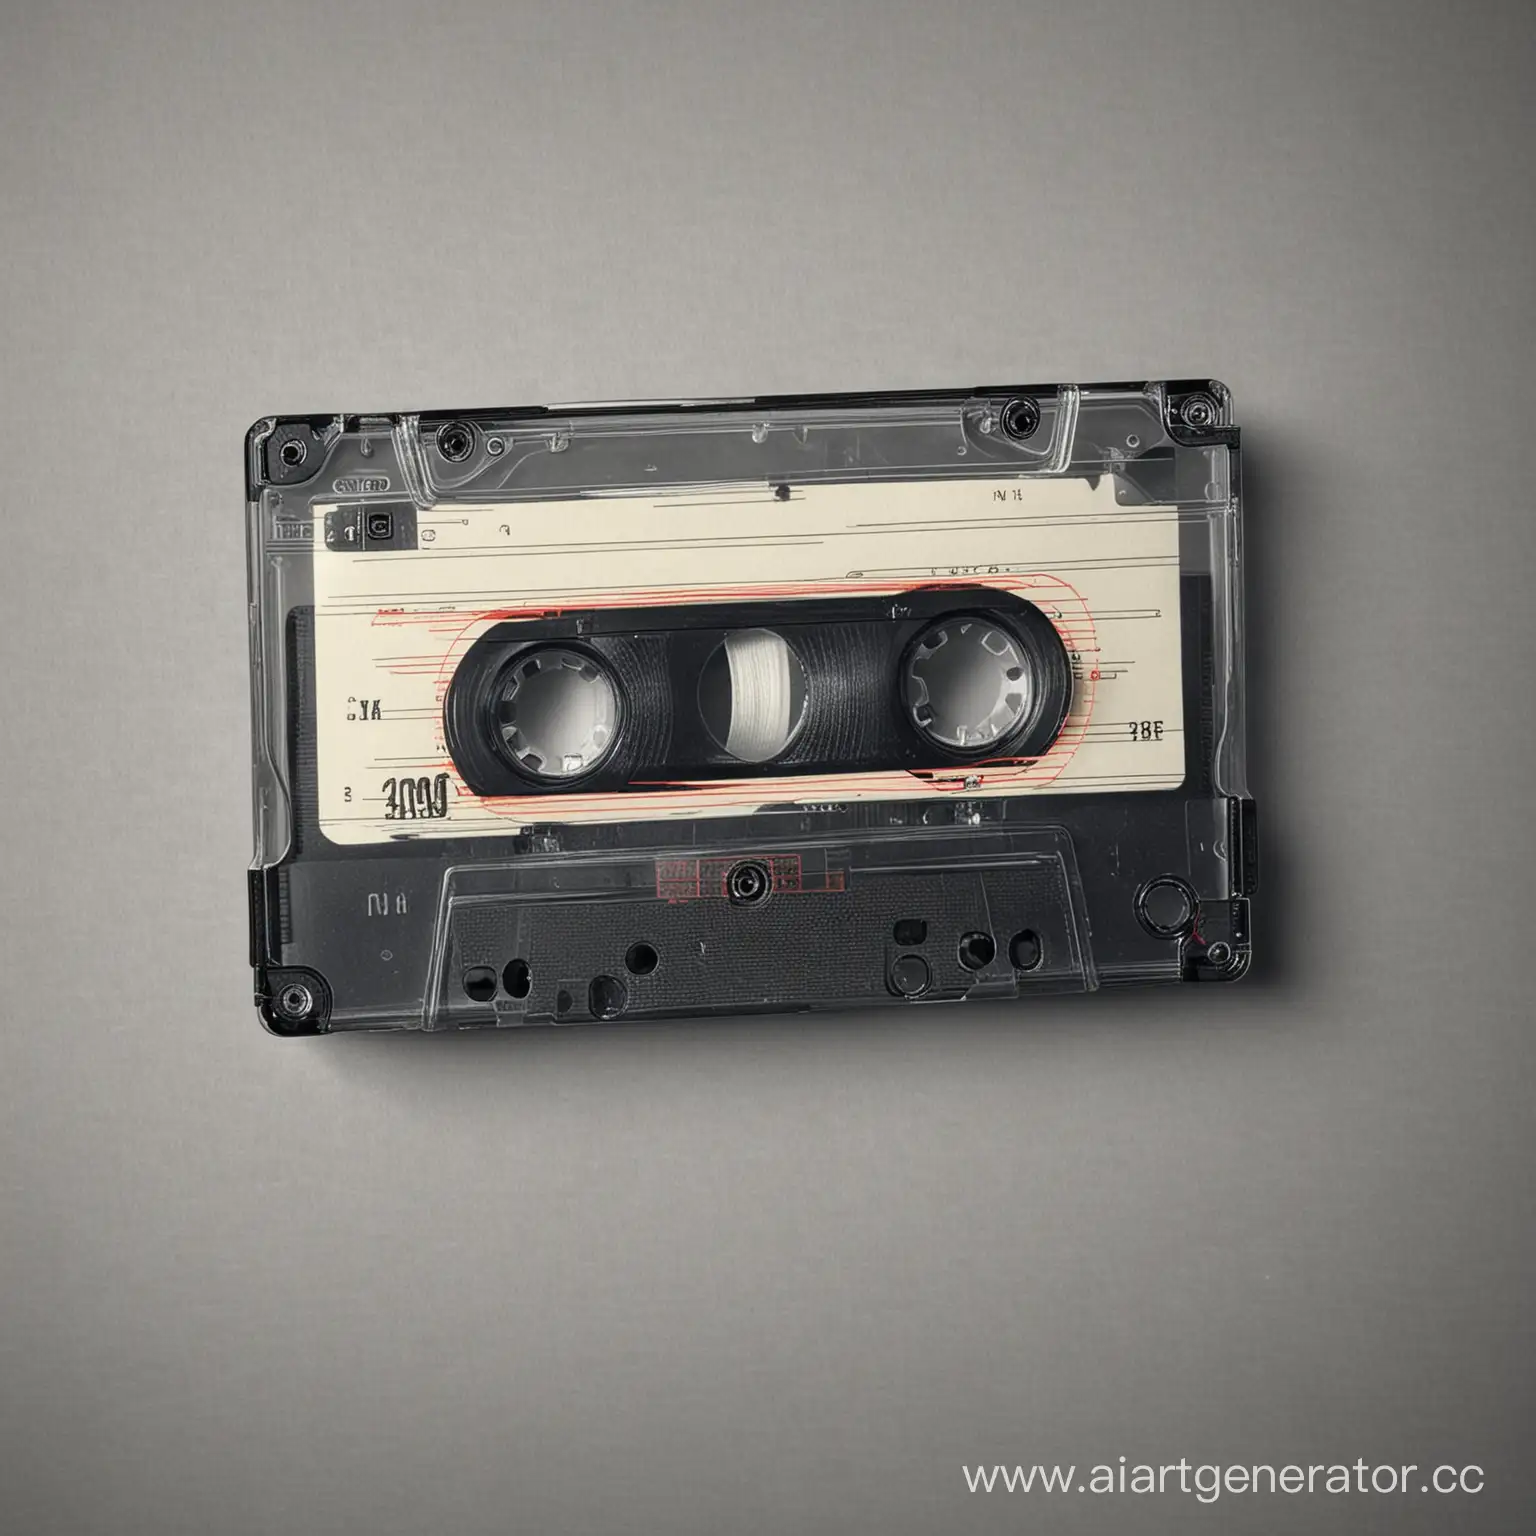 Audio Cassette playing
